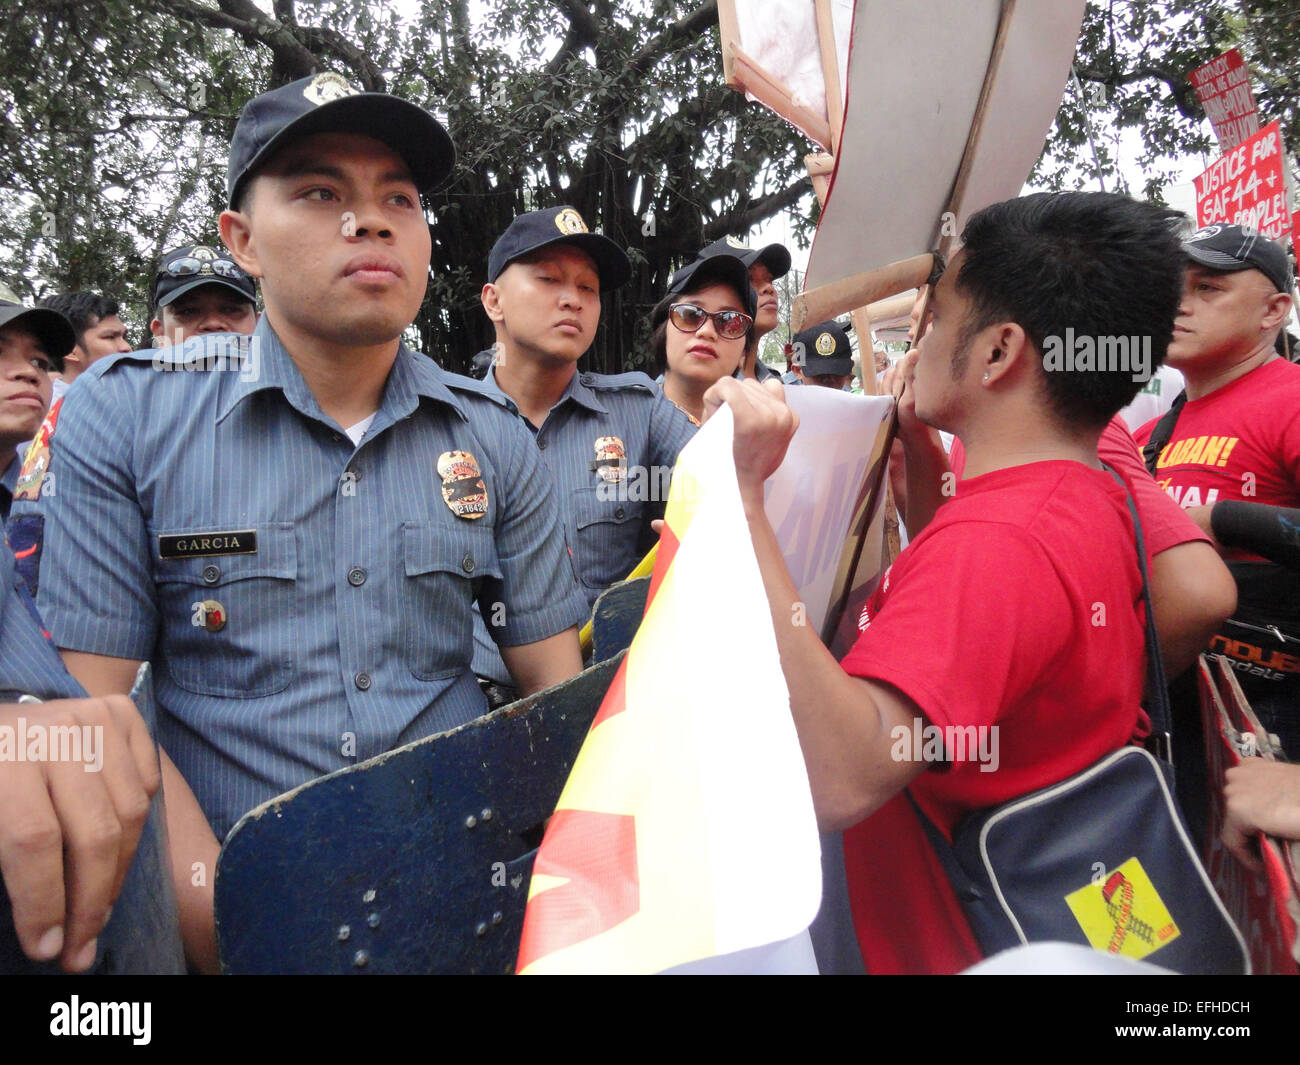 Police officers look on as they block protesters from approaching the US Embassy. Protesters accused President Benigno Aquino III, suspended police chief Alan Purisinma, and the US government of being involved in the botched anti-terror operation that killed 44 police commandos, 18 Moro rebels, and 7 civilians. The protest was held on the 116th anniversary of the Filipino-American War that claimed at least 600,000 lives. © Richard James Mendoza/Pacific Press/Alamy Live News Stock Photo